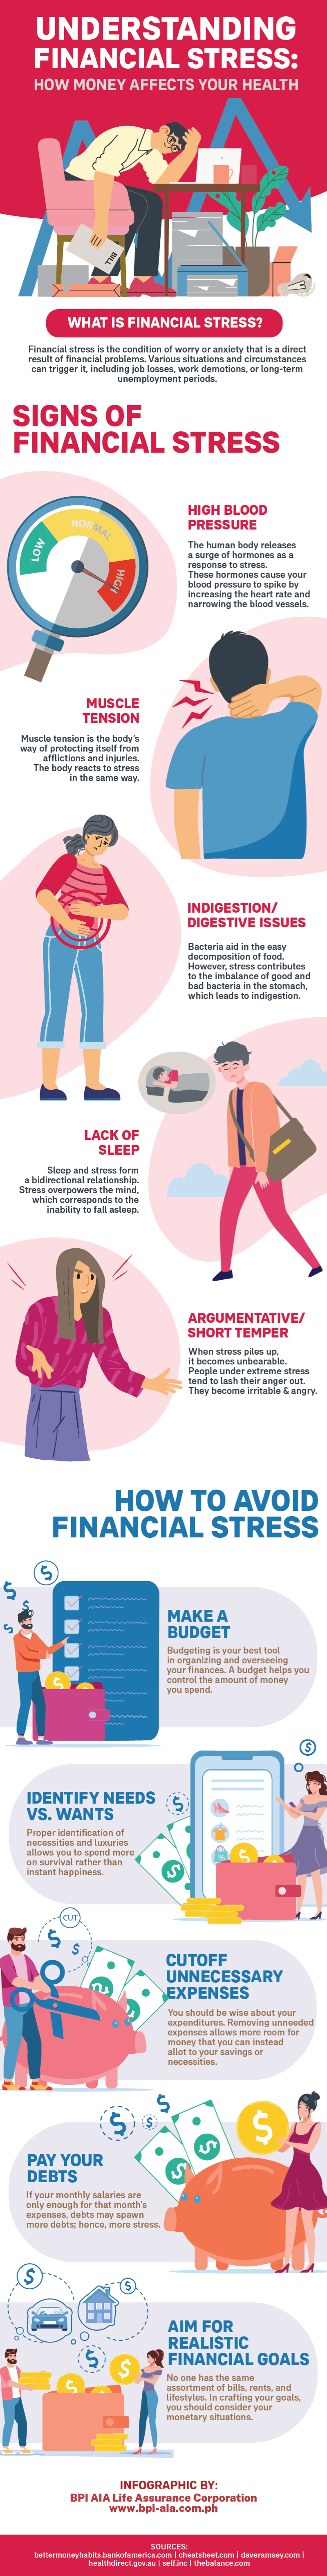 Understanding Financial Stress: How Money Affects Your Health Infographic